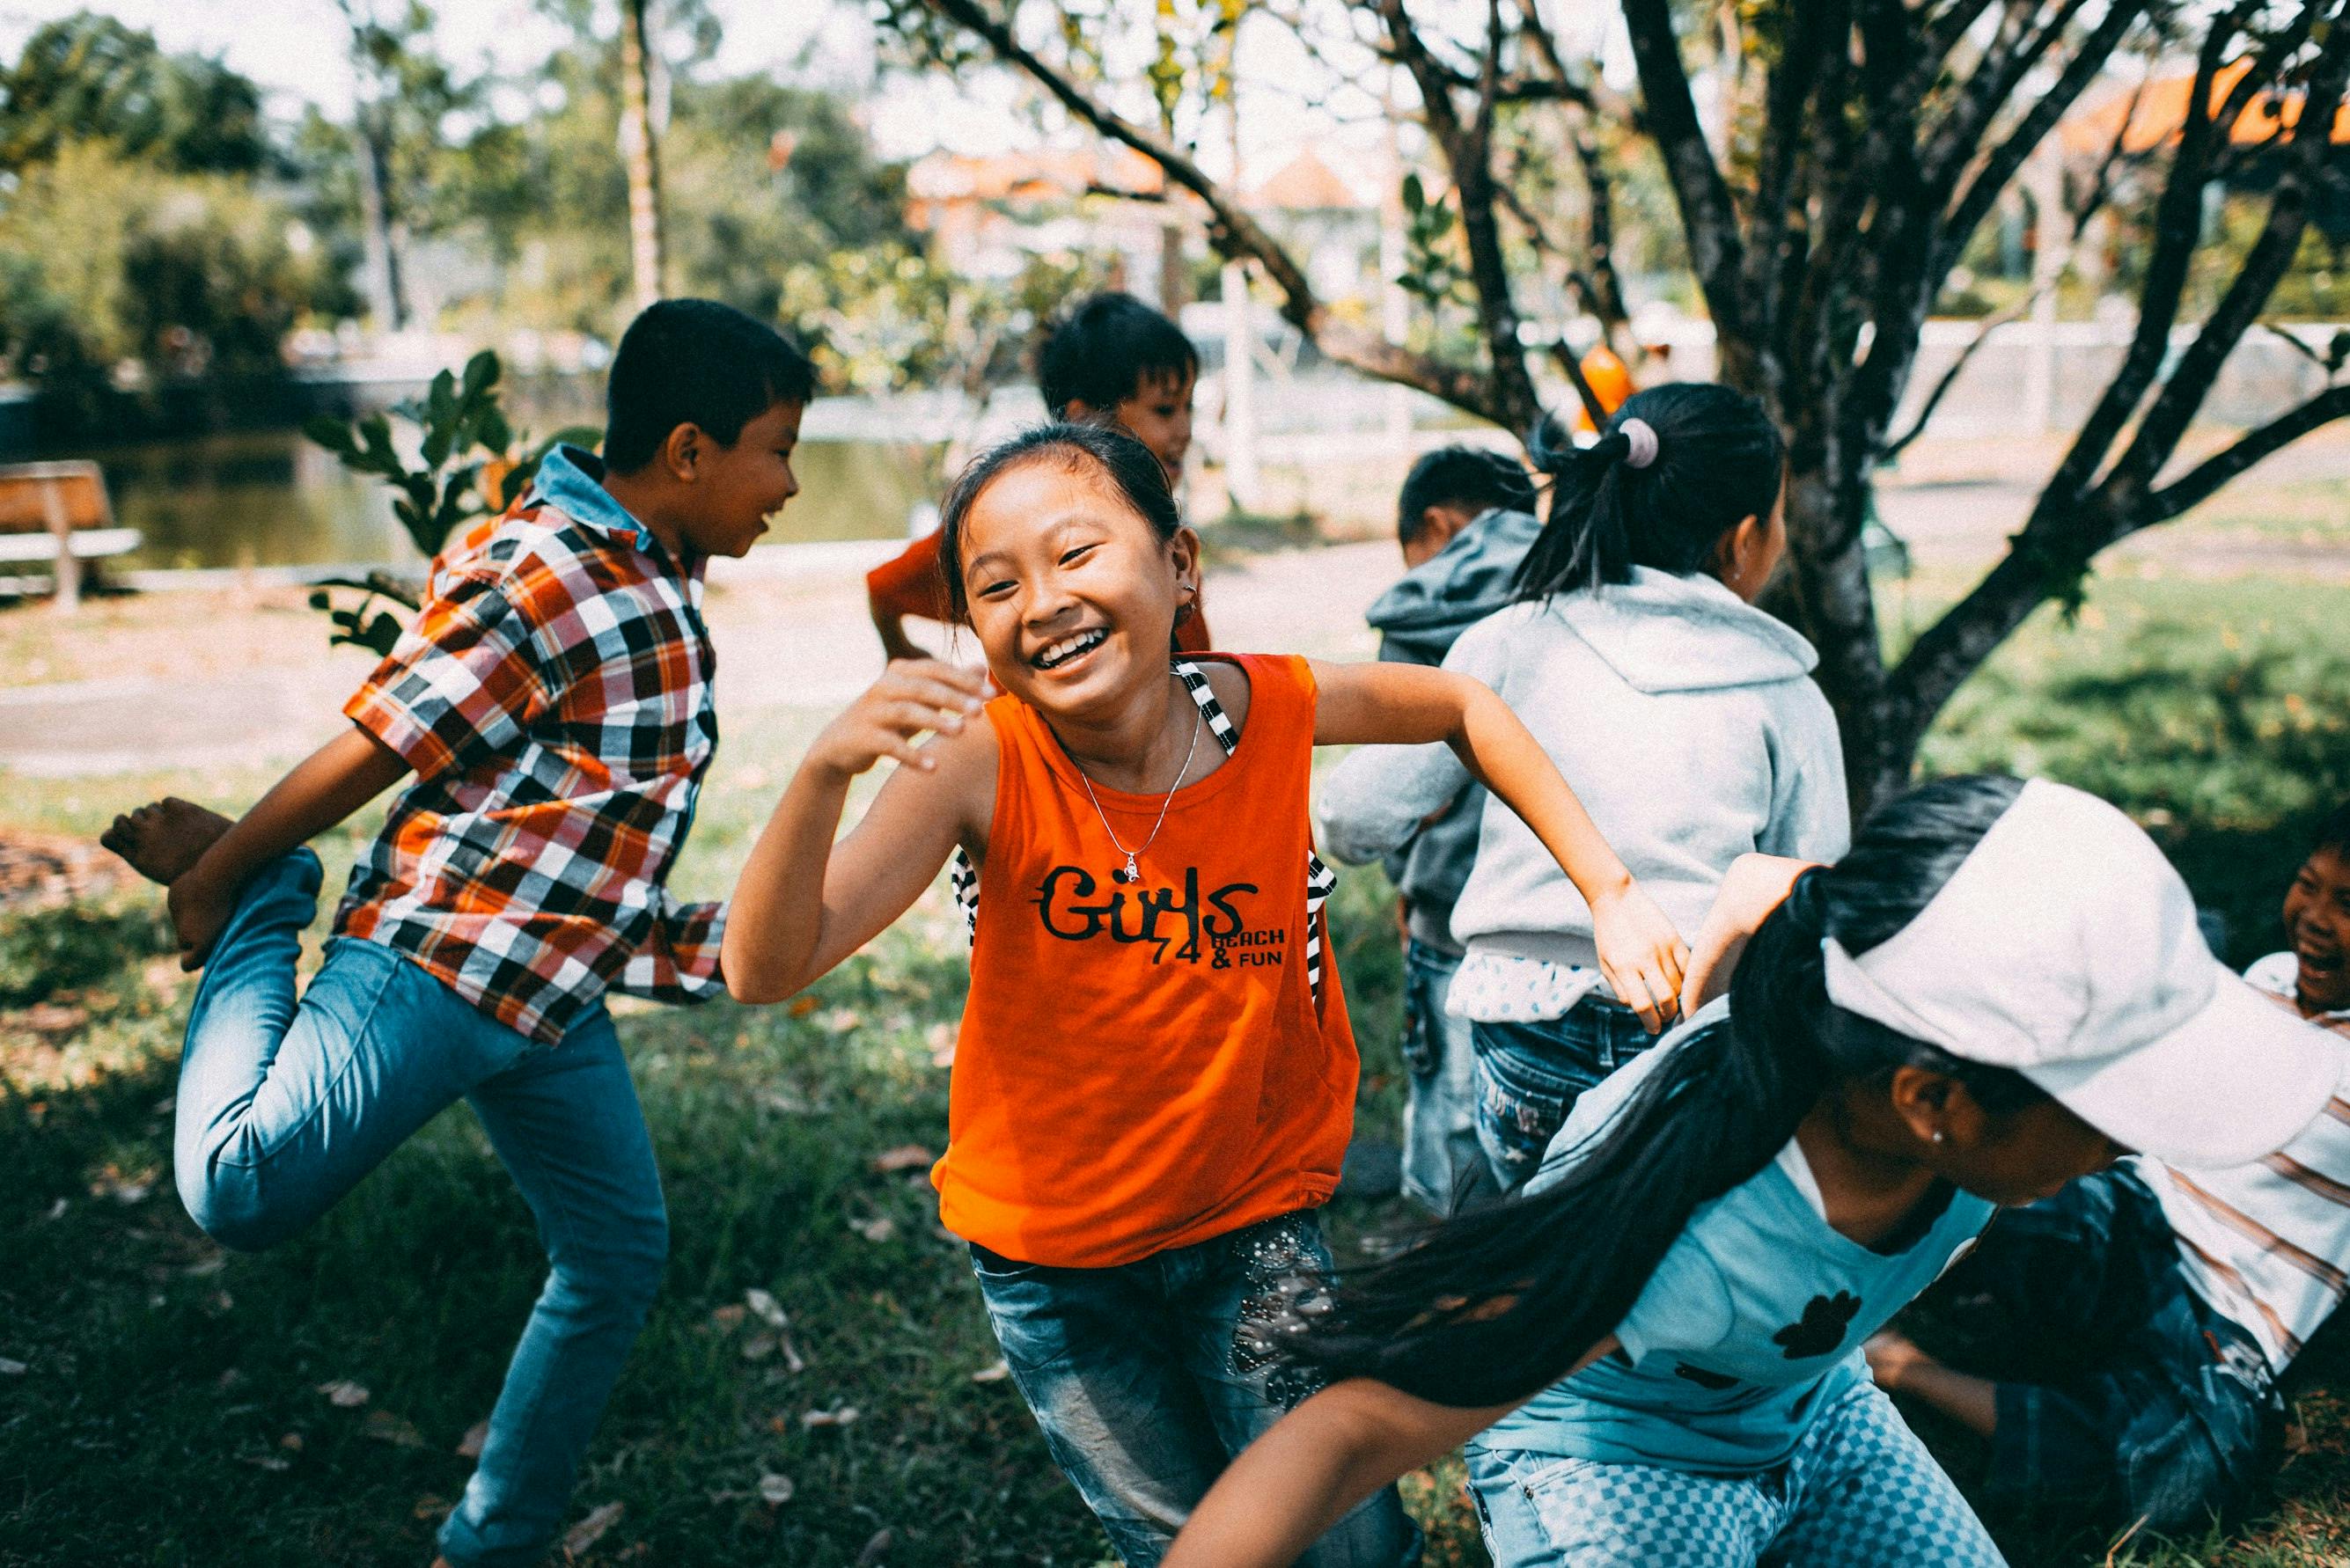 Girl in orange t-shirt playing game with group of kids in park